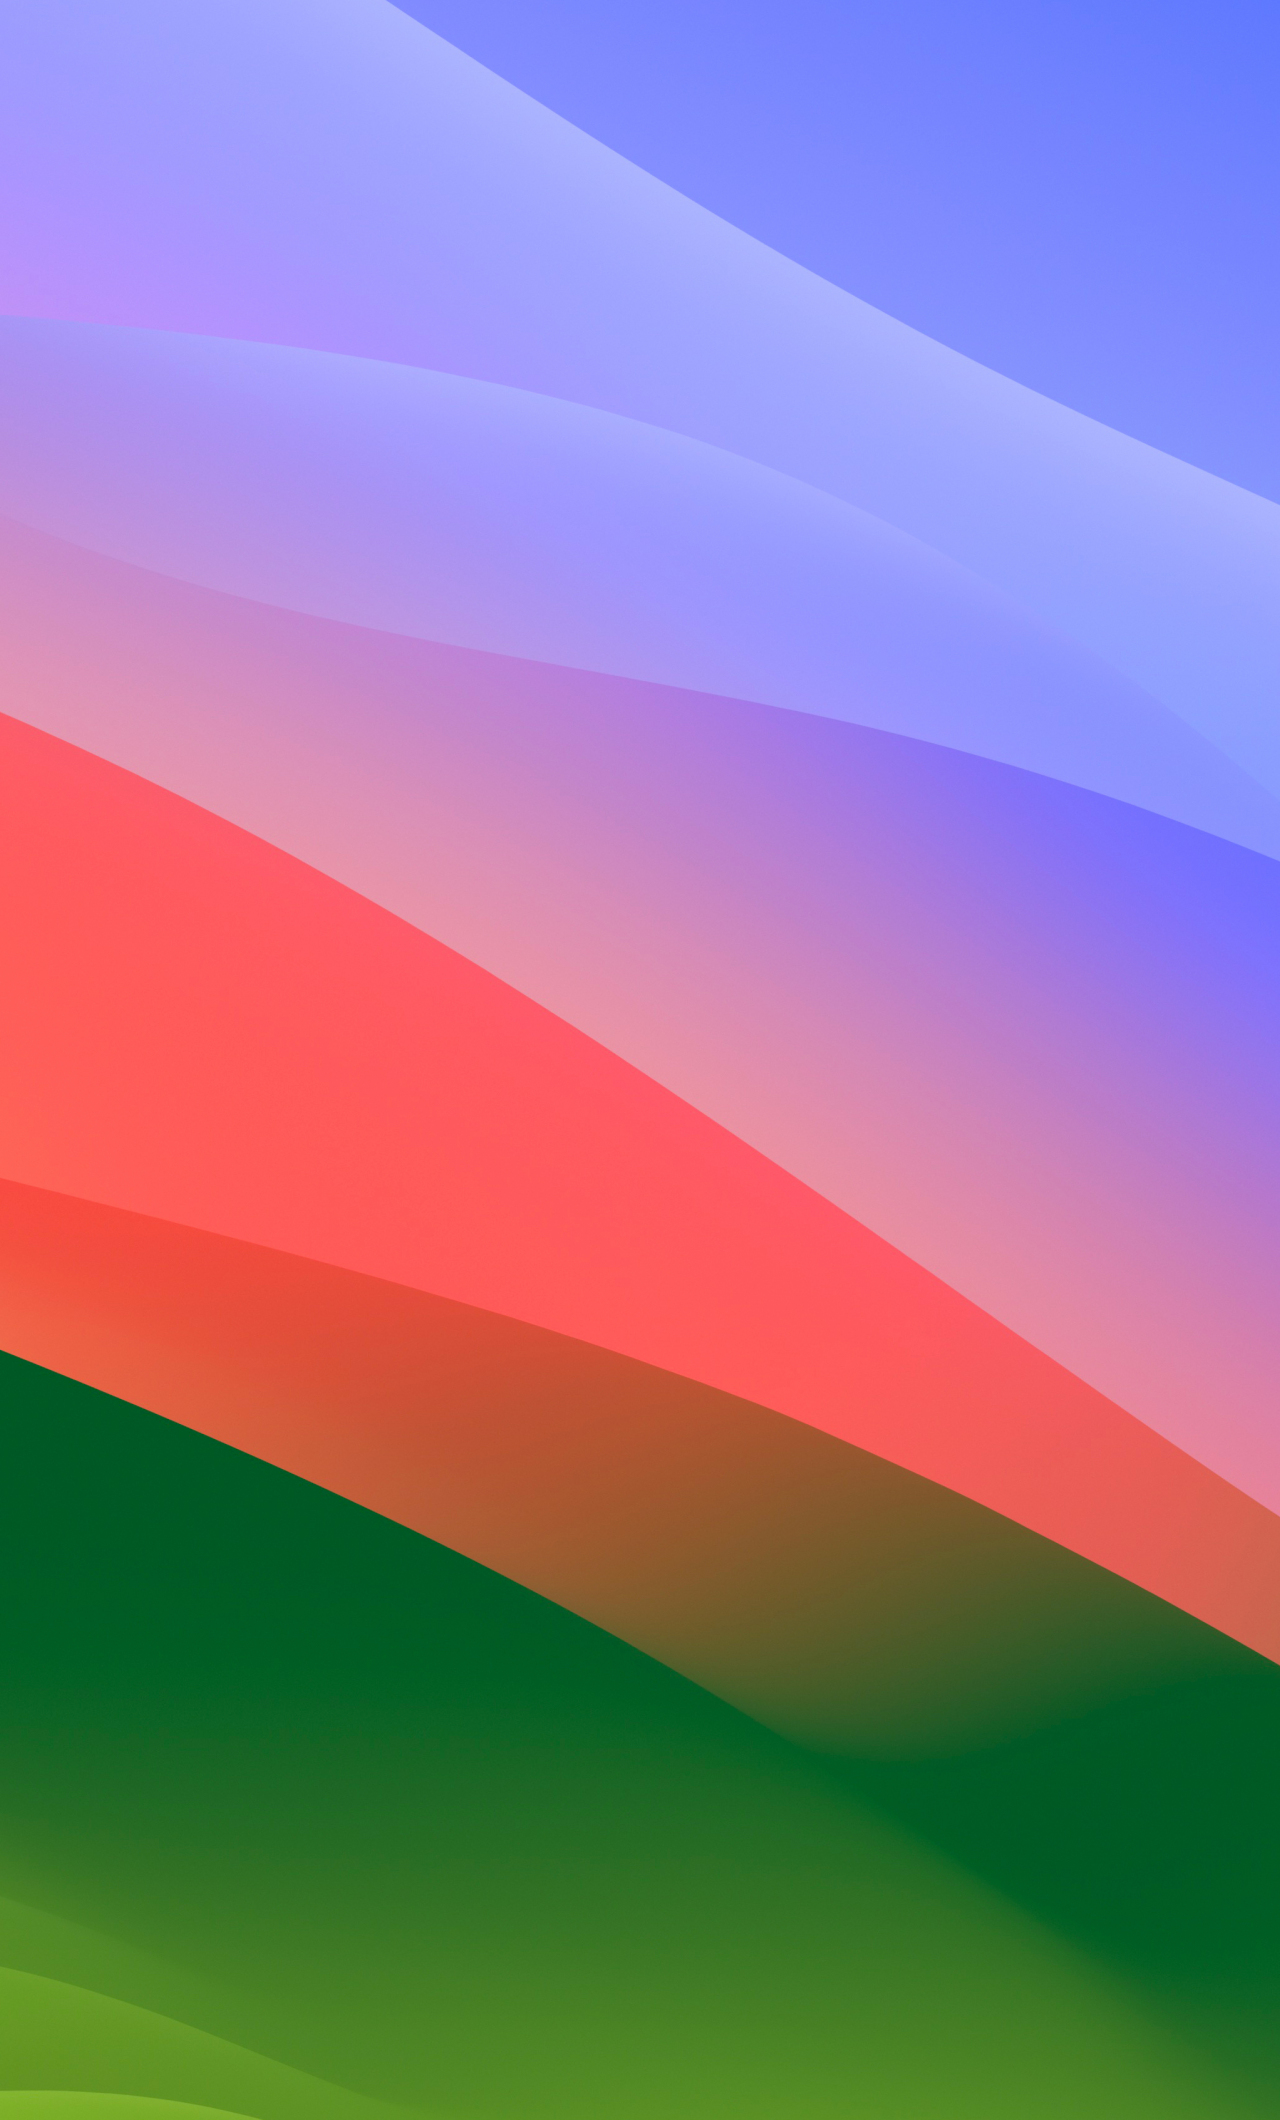 MacOS Sonoma, colorful waves, stock photo, 1280x2120 wallpaper